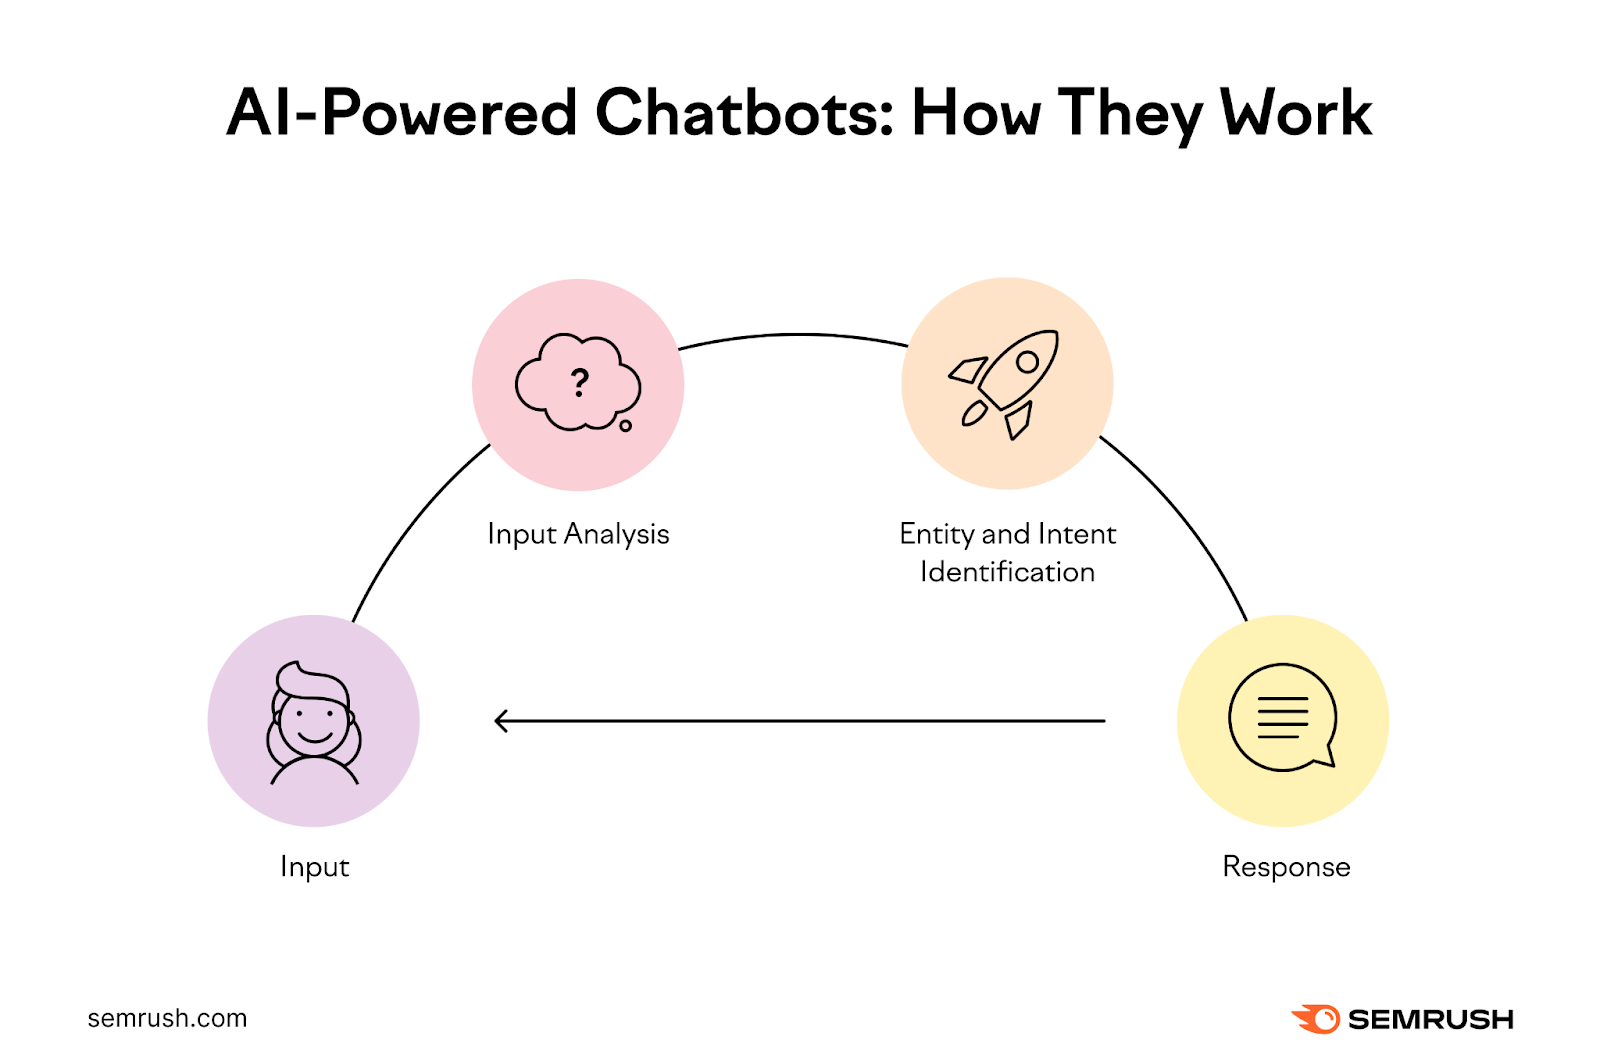 An infographic showing how AI-powered chatbots work